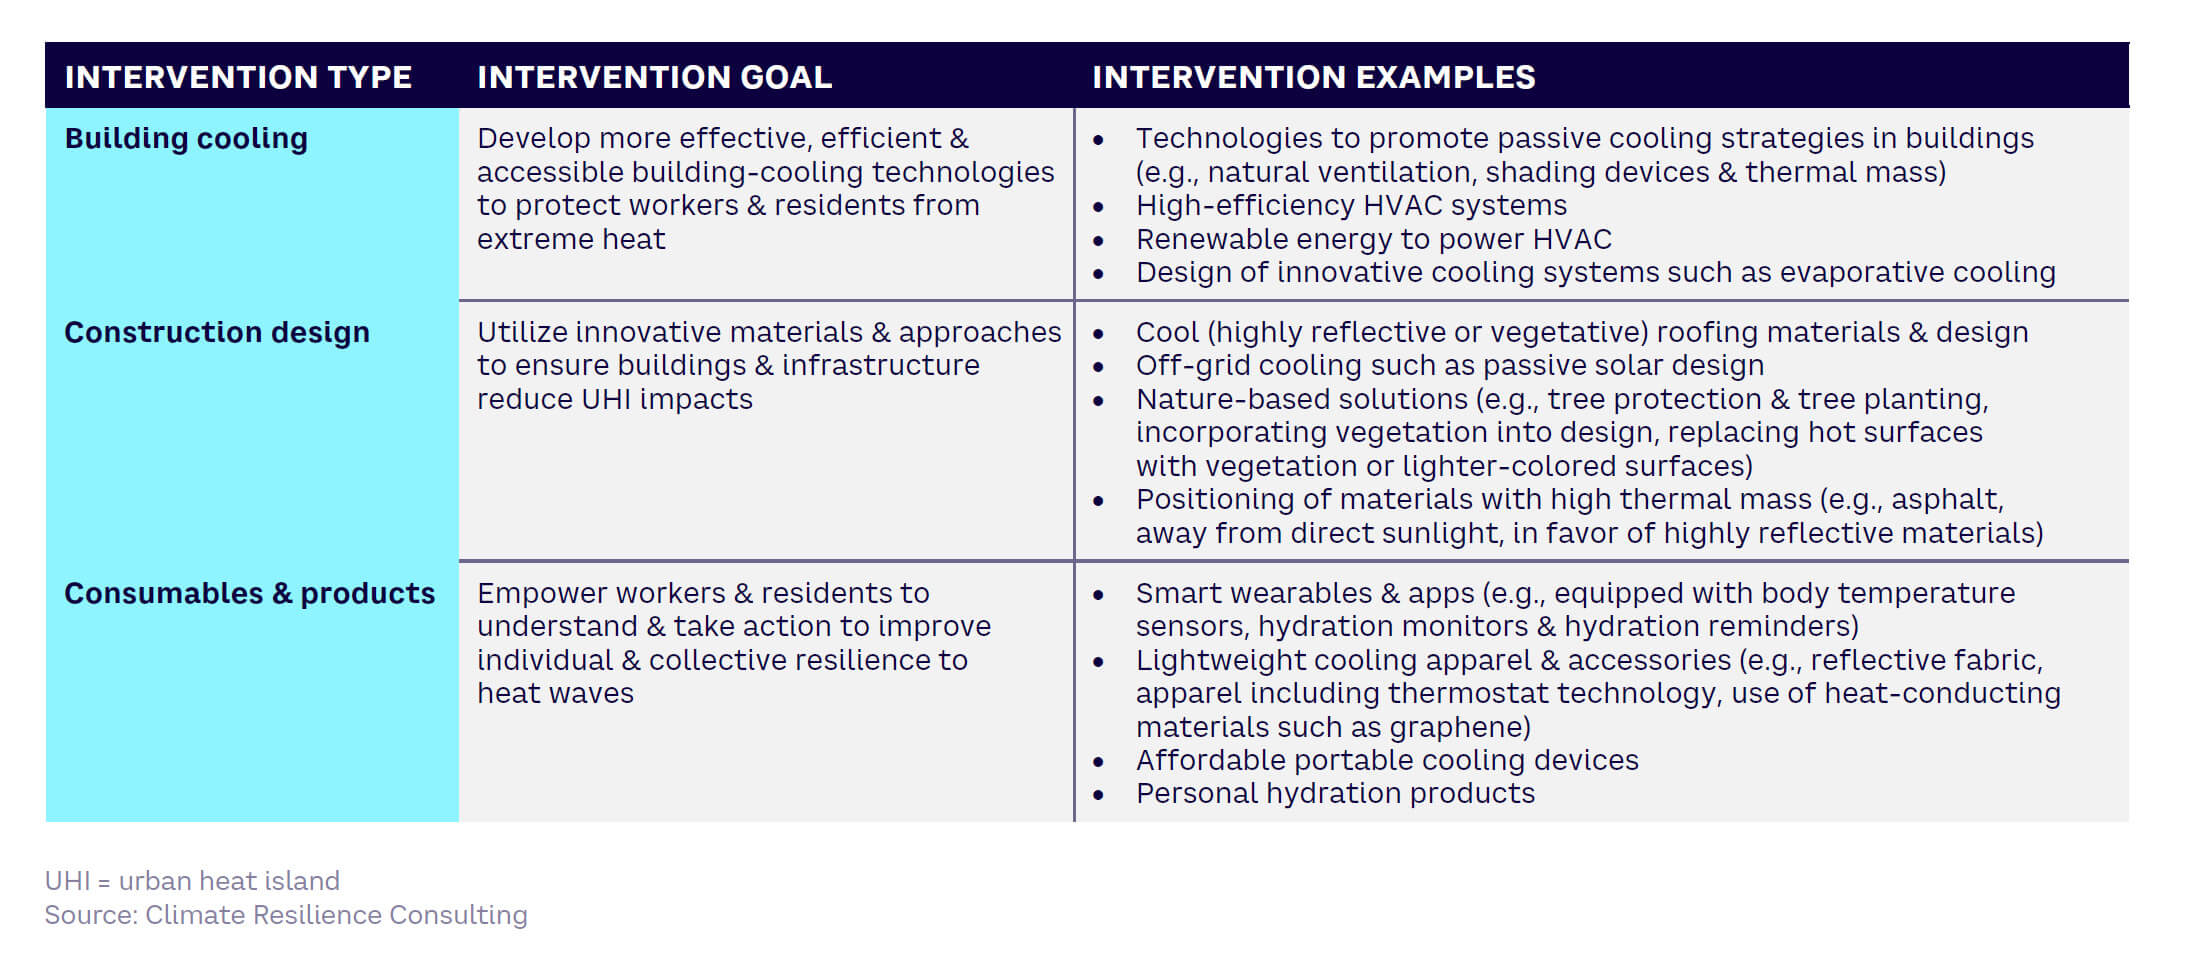 Table 9 — Example technology interventions to reduce extreme heat impacts